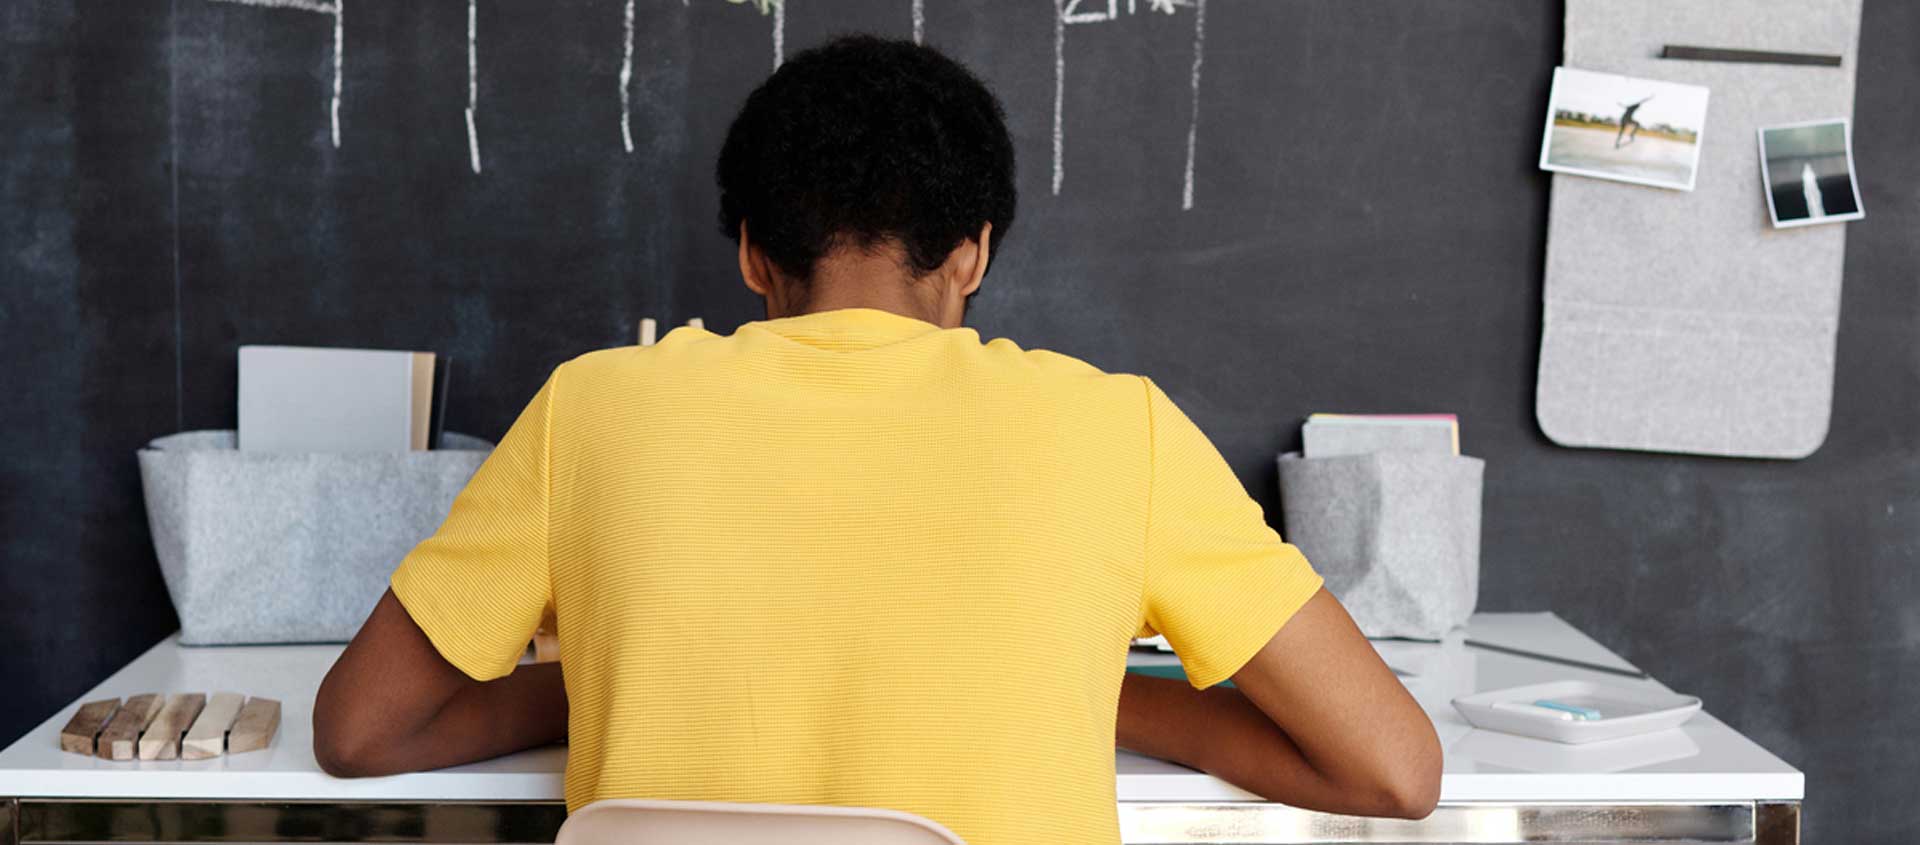 A Balck American boy studies at a desk with his back facing the camera.